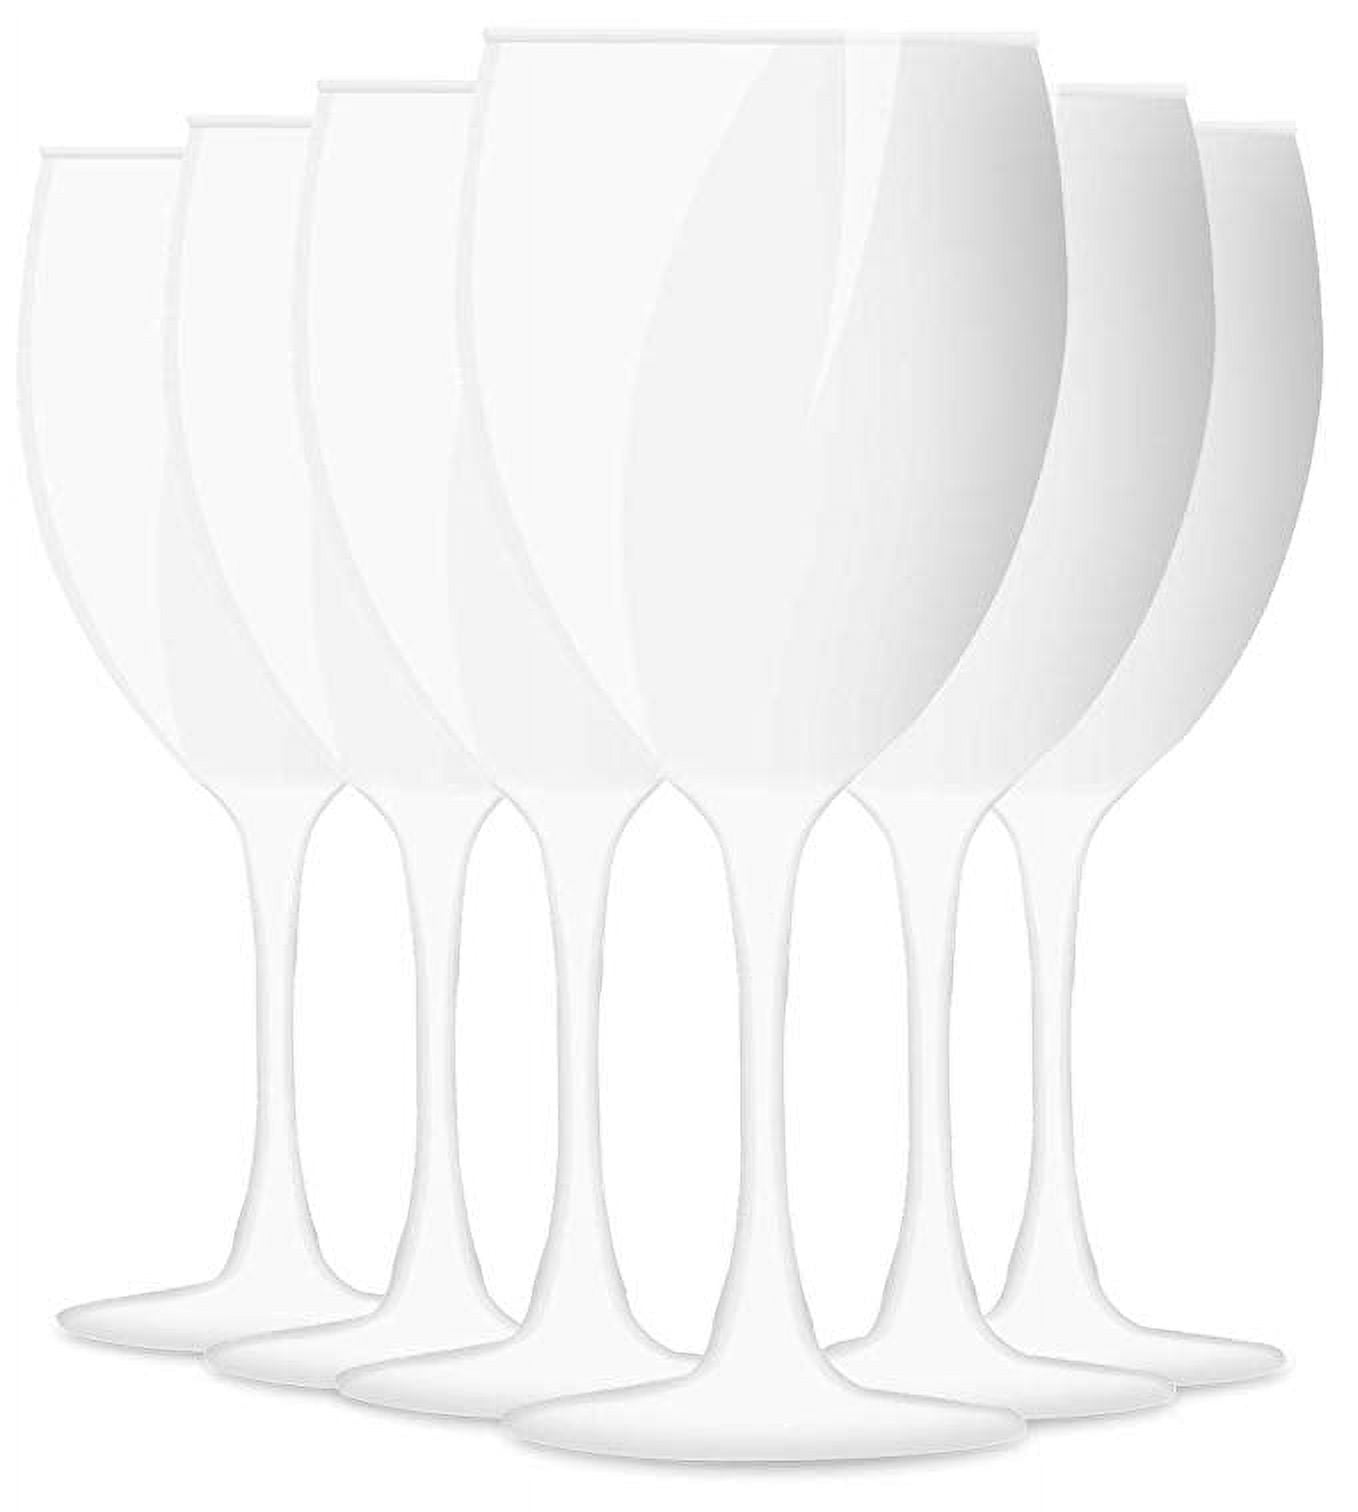 10oz Wine Glass – The Stainless Depot